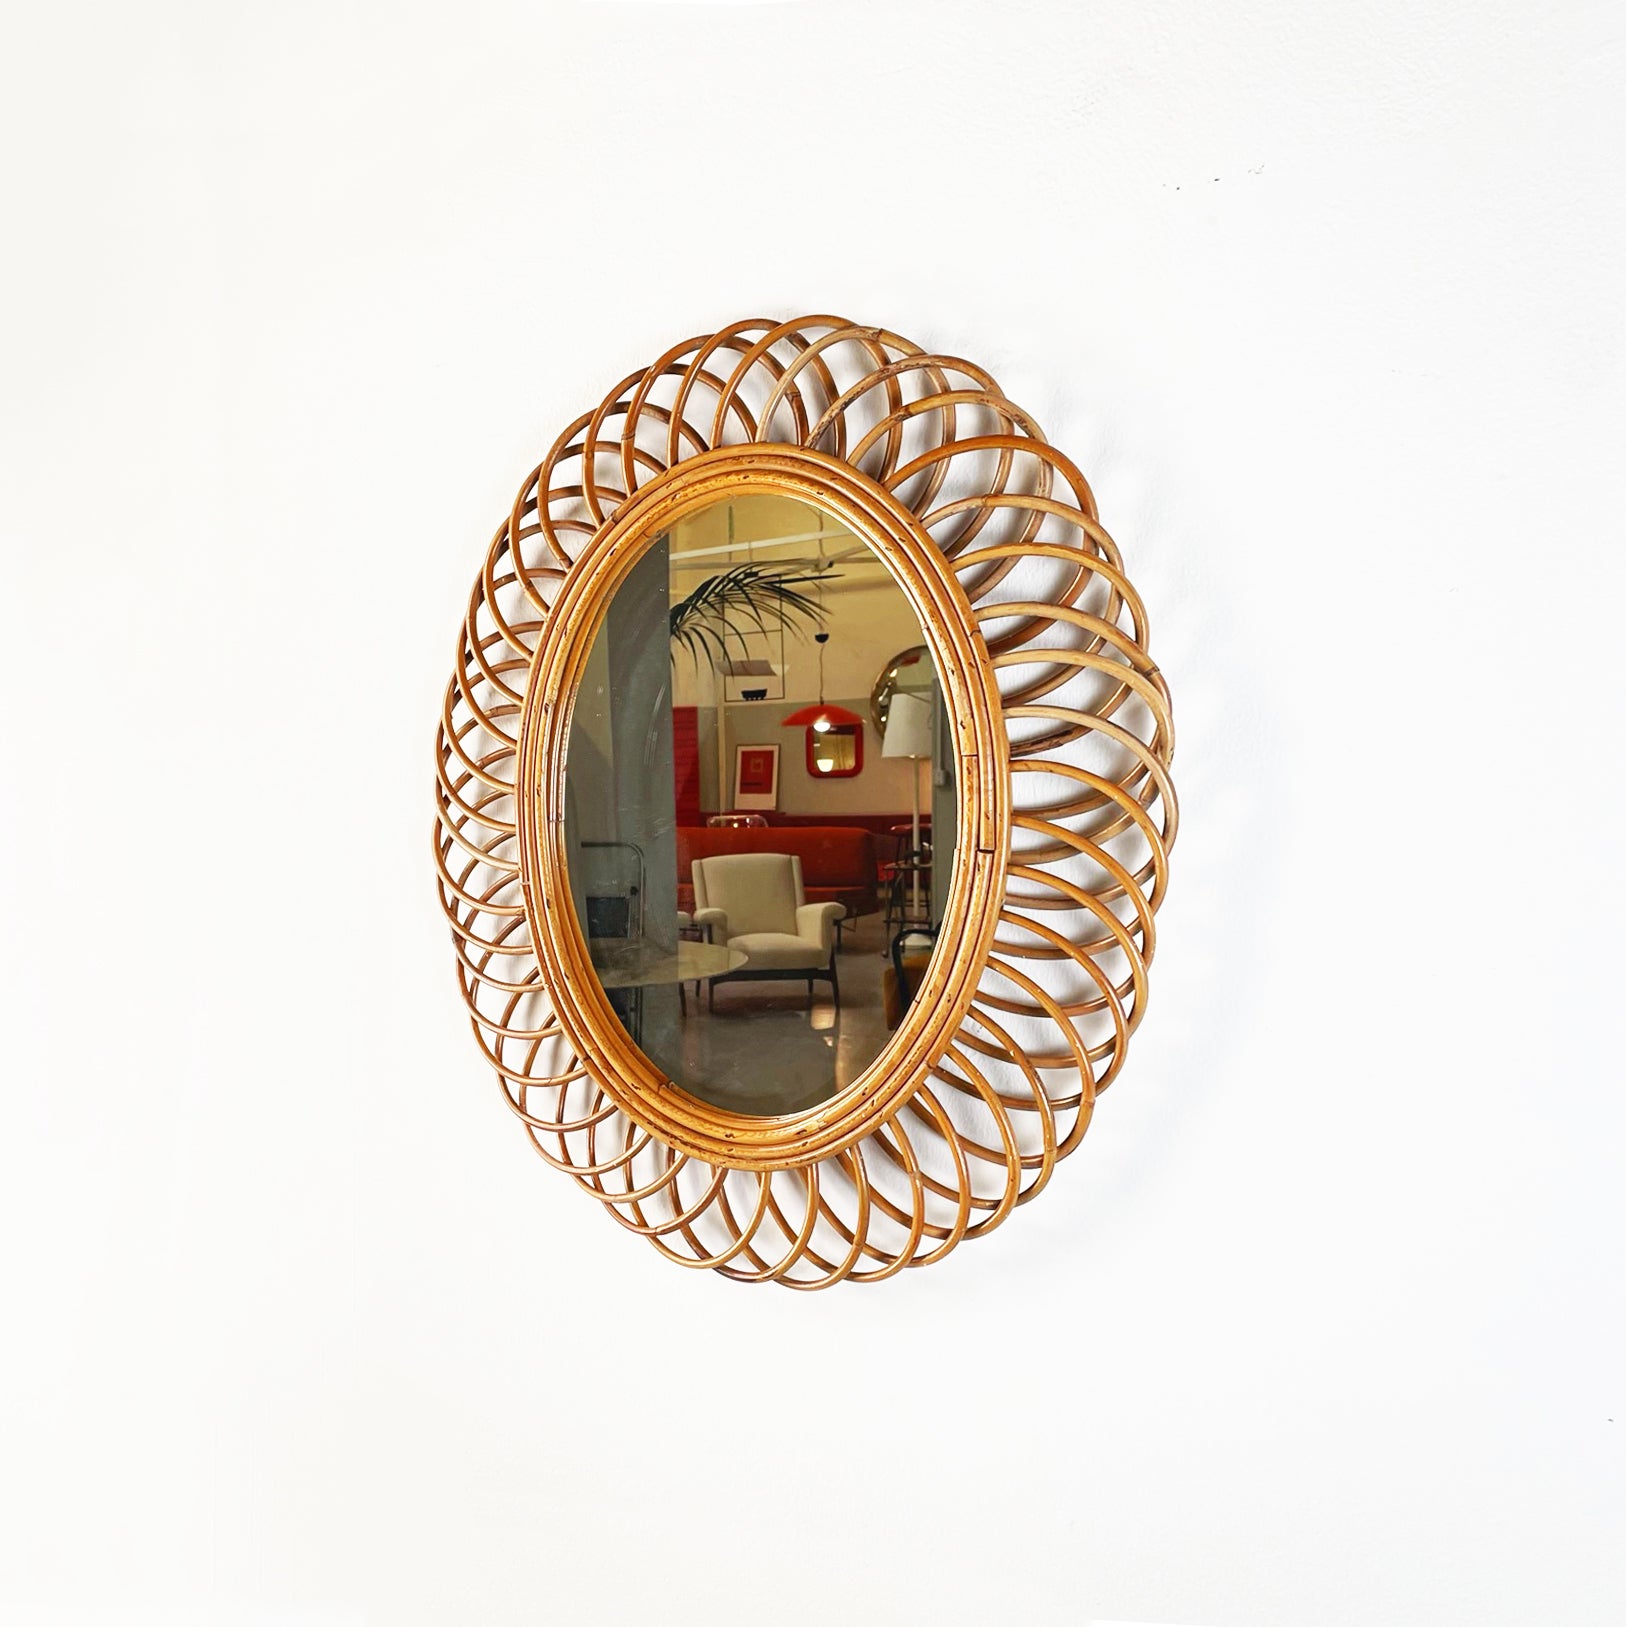 Italian mid-century modern Oval-shaped wall mirror in curved rattan, 1950s
Oval-shaped wall mirror with finely worked curved rattan frame.
1950s.
Very good conditions, shows small signs of ageing.
Measurements in cm 56 x 3 x 70 H
This wall